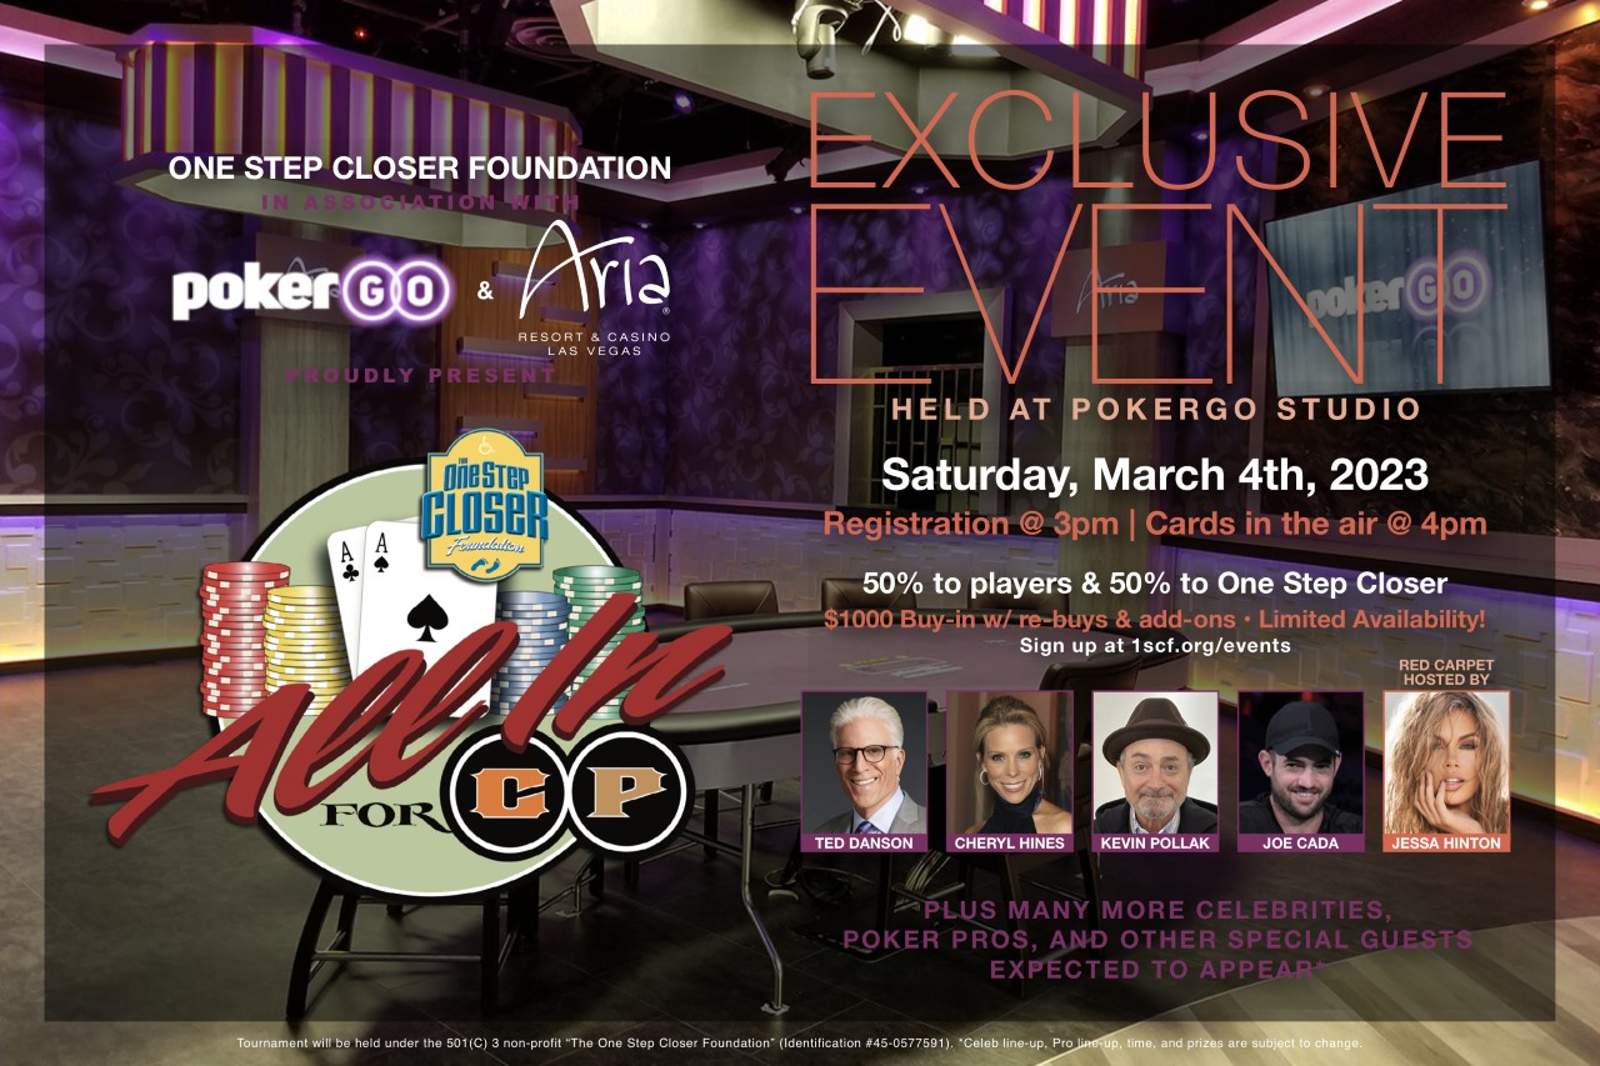 All In for CP Charity Poker Event Takes Place at the PokerGO Studio March 4